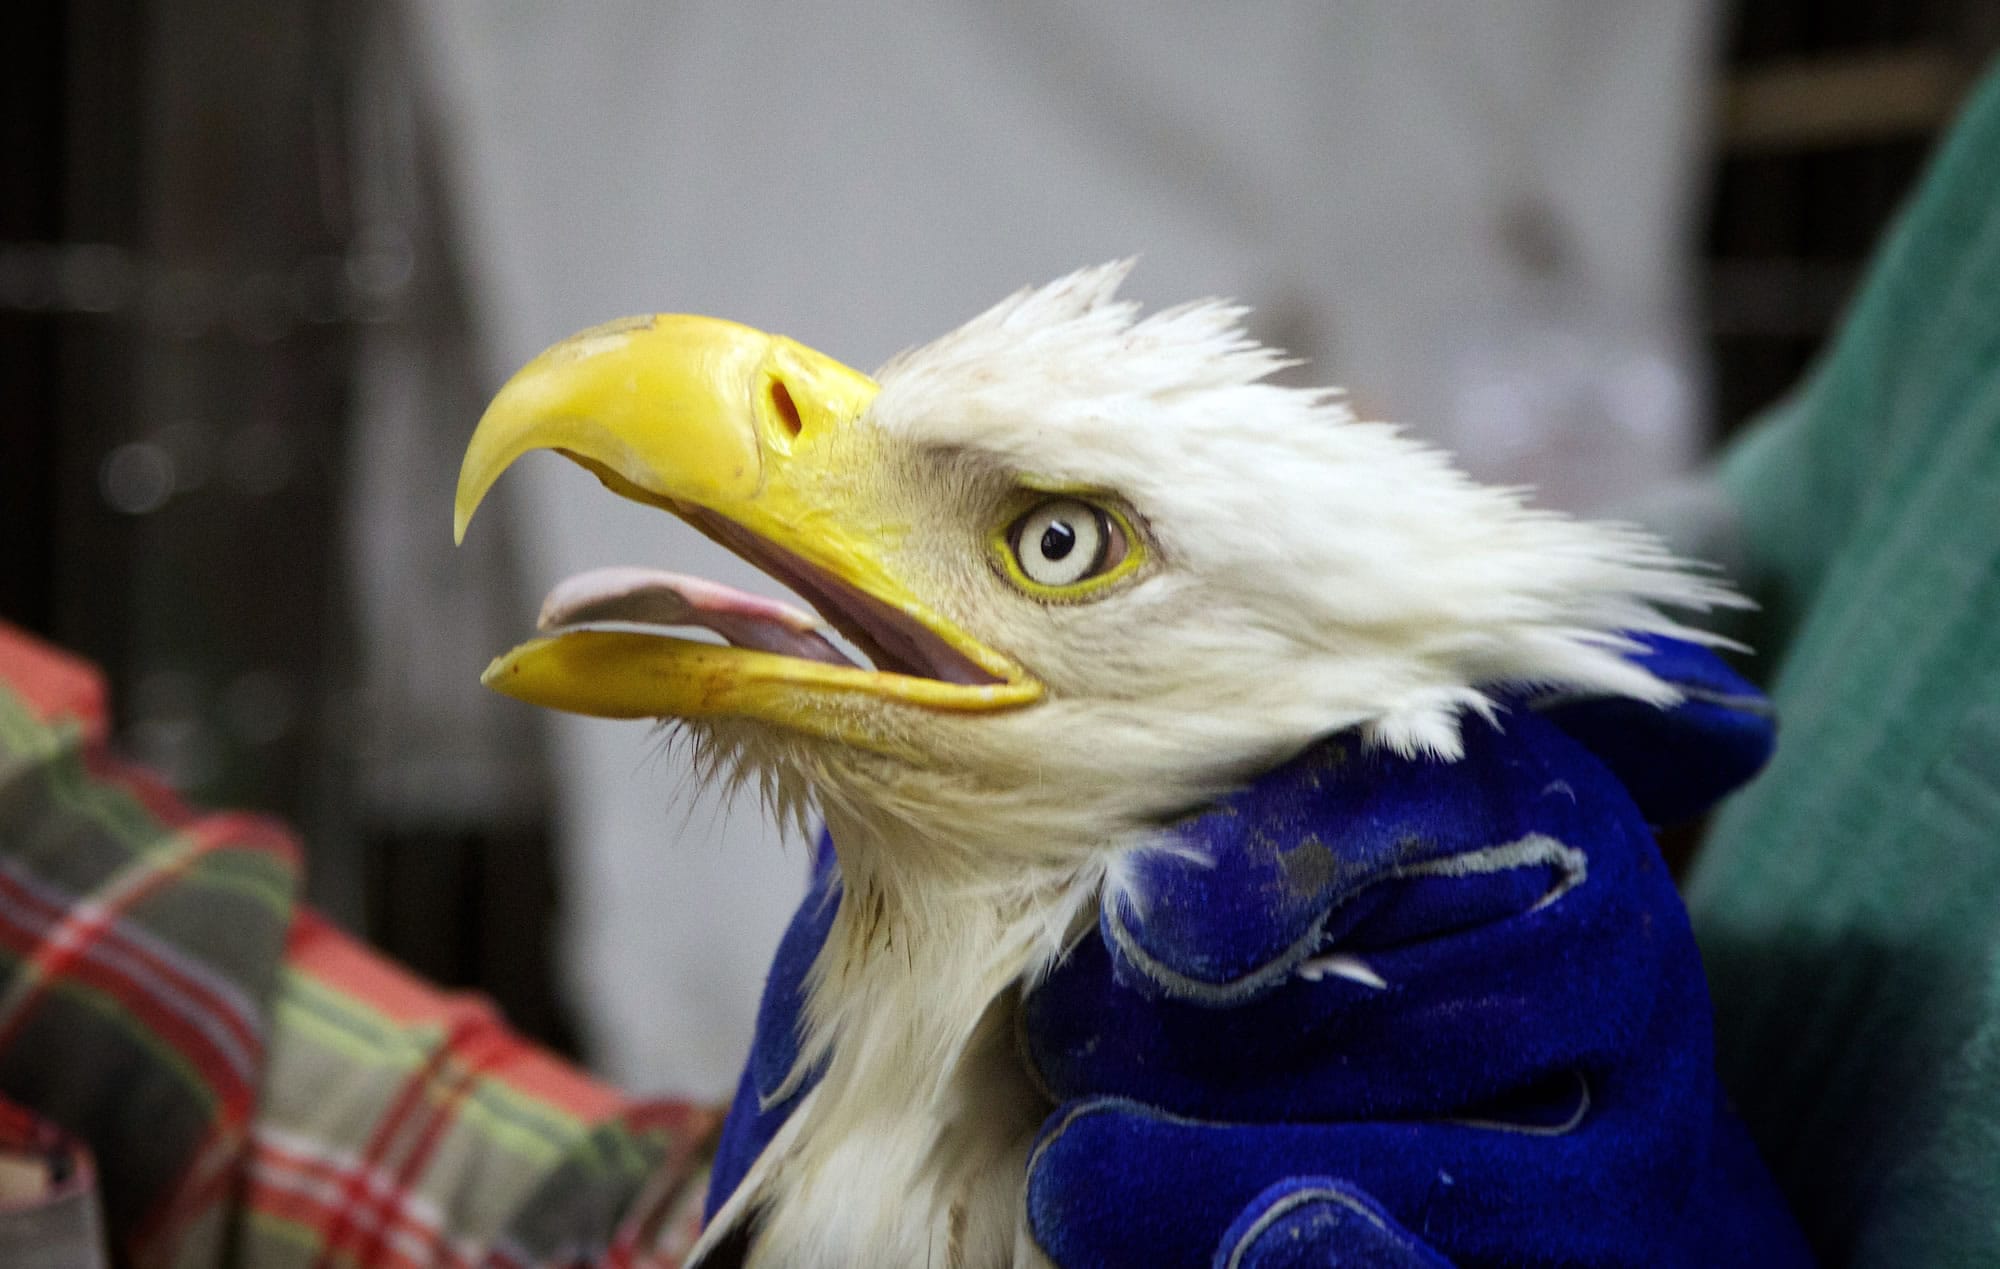 A young male bald eagle, found with lead poisoning near Longview, is treated May 31 at the Audubon Society of Portland's Wildlife Care Center.